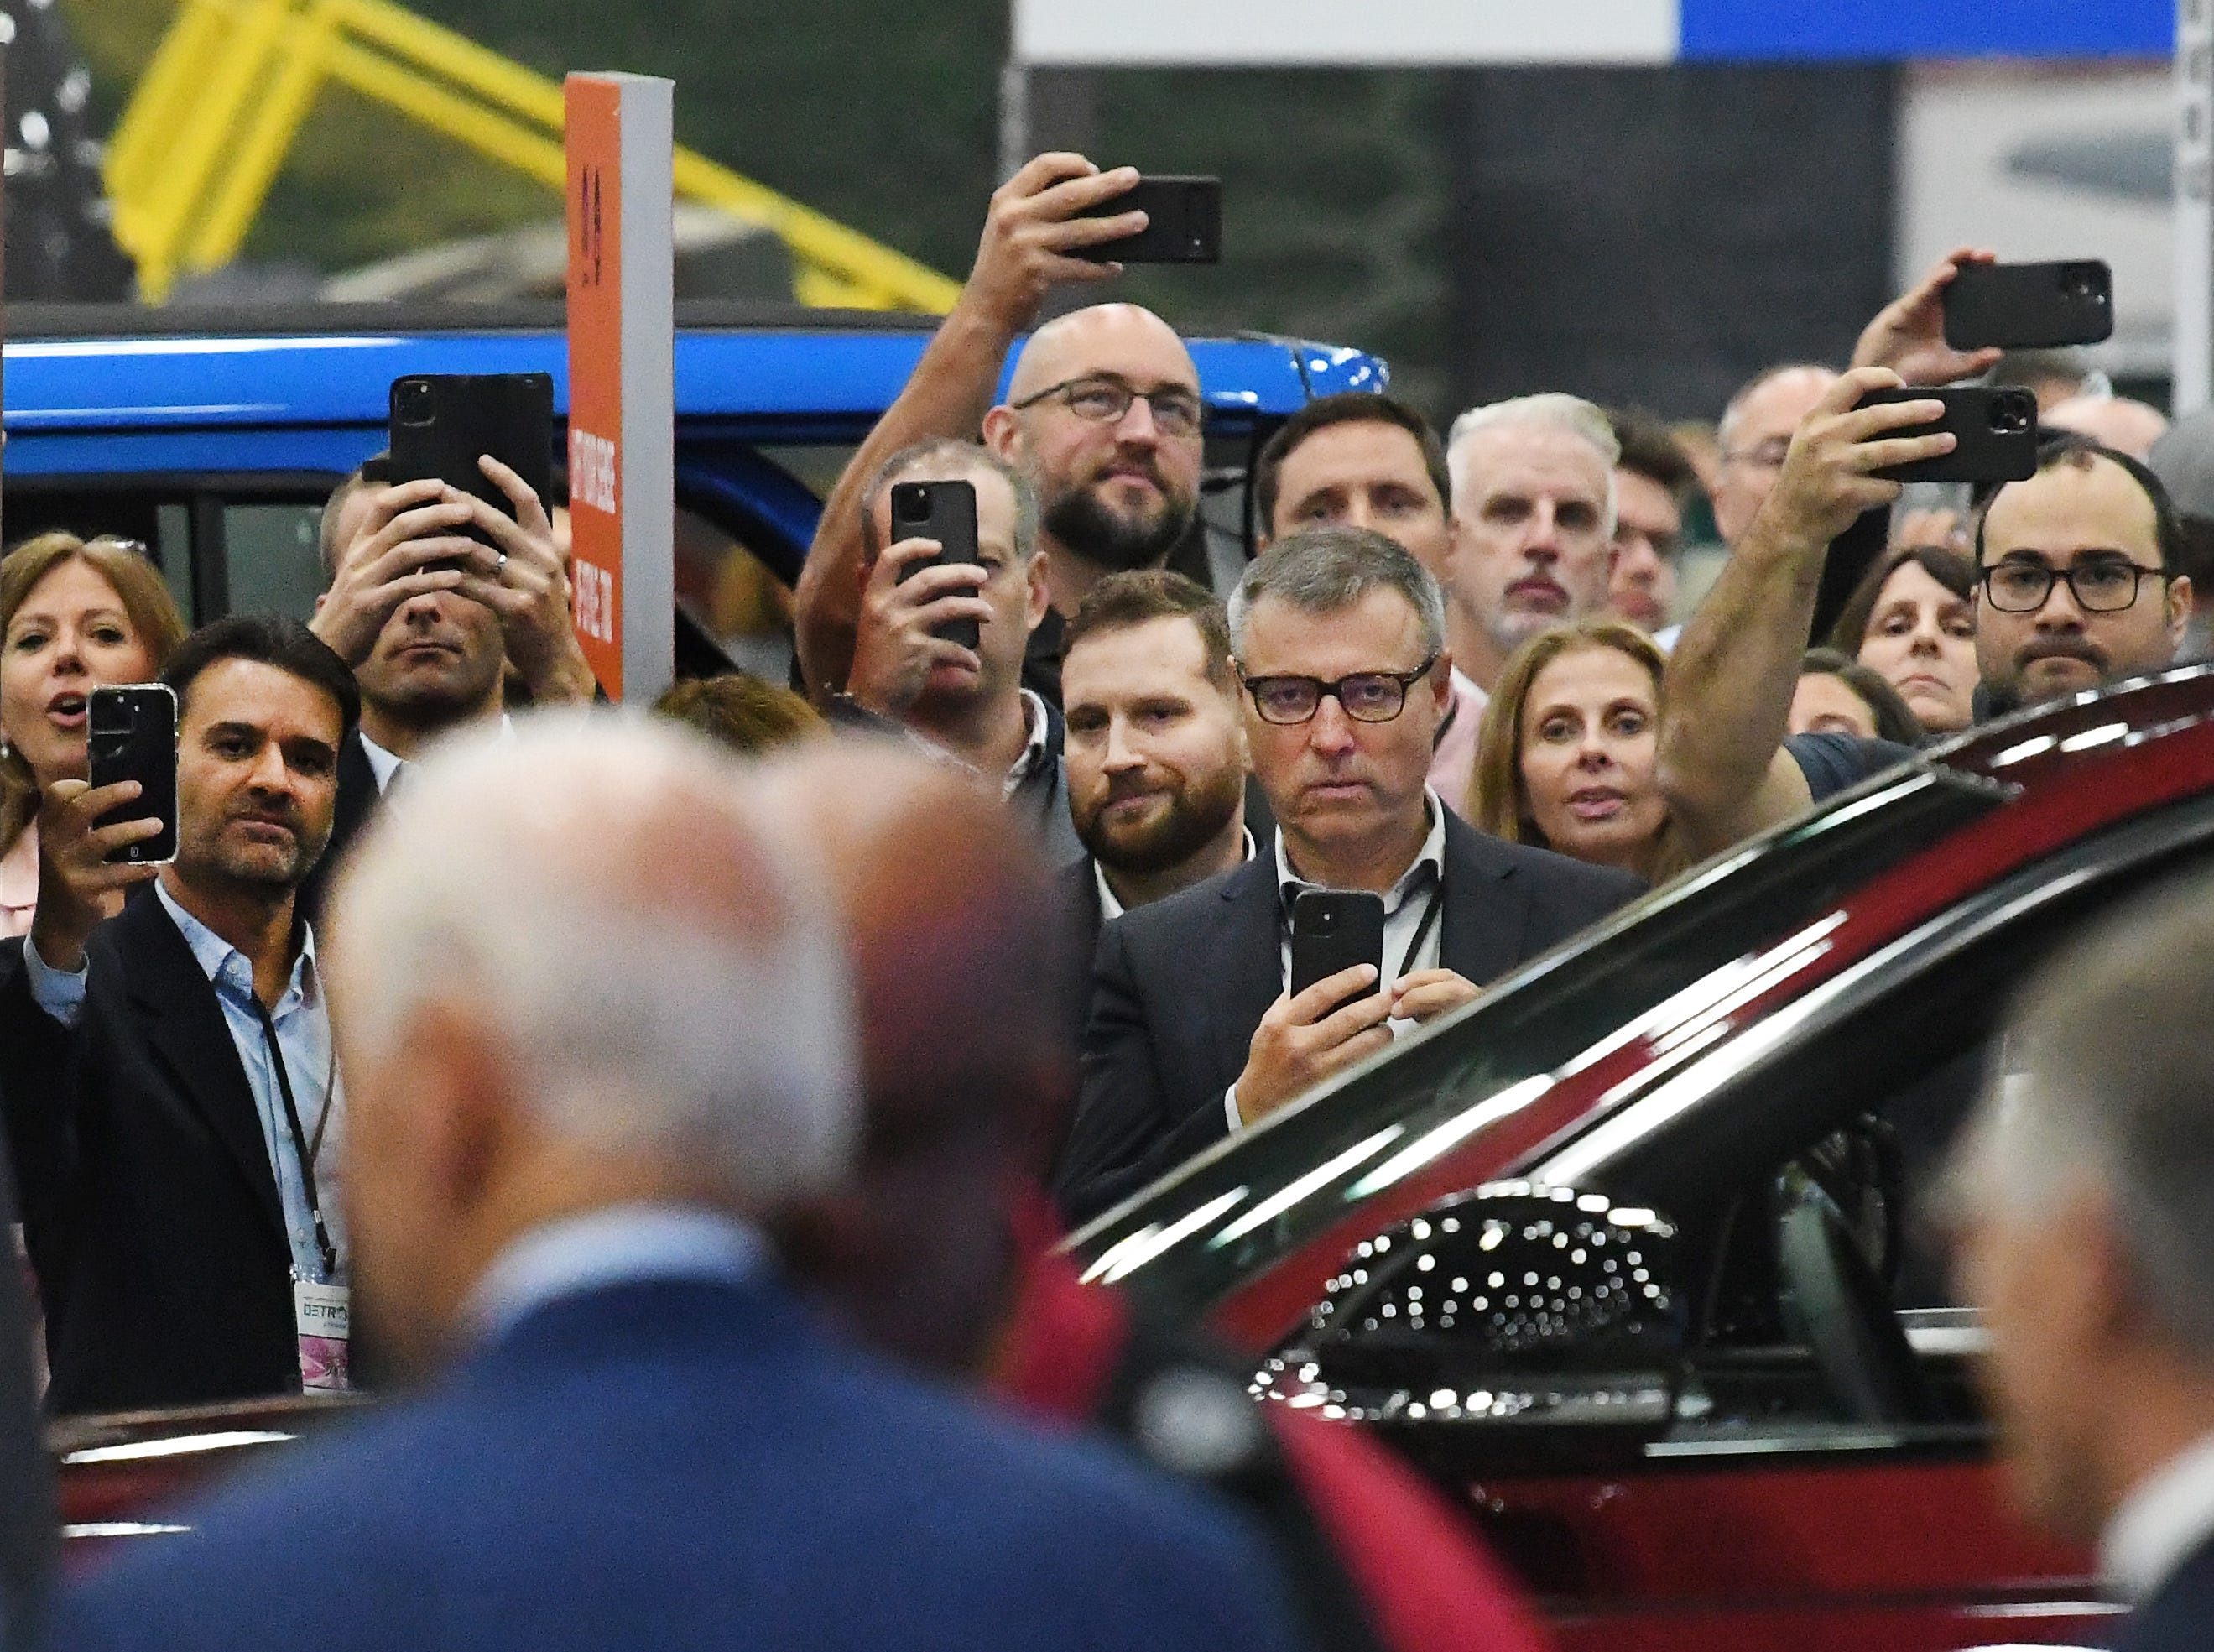 Visitors to the North American International Auto Show Media Day get some shots of President Joe Biden during a tour of the show in Detroit, Michigan on September 14, 2022.